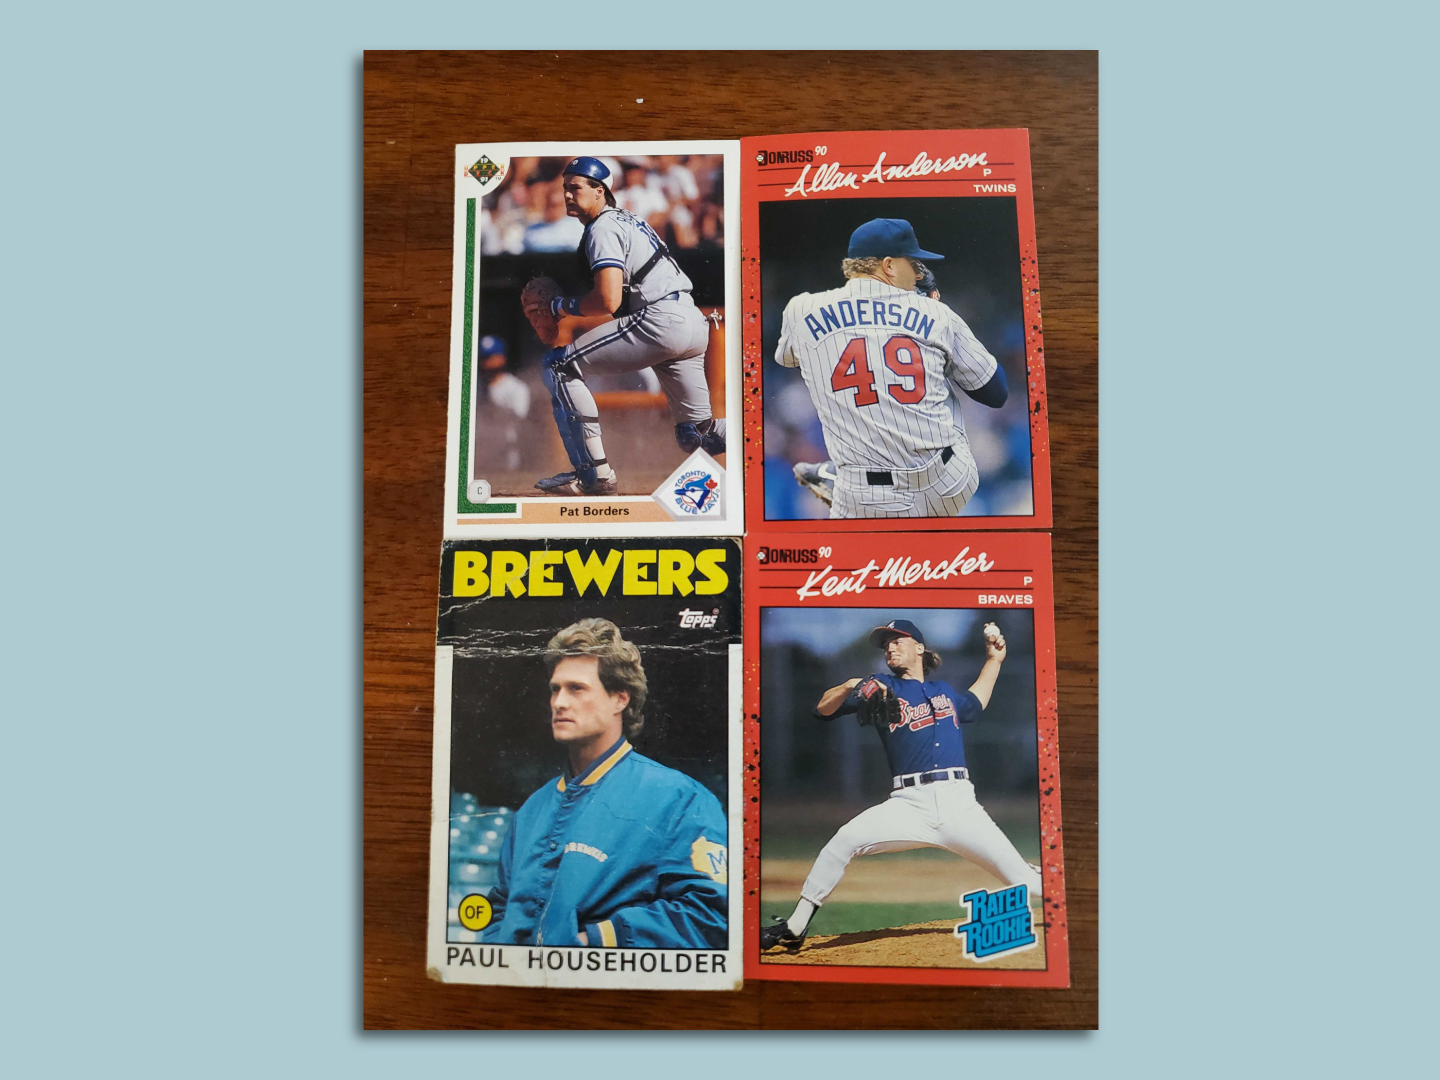 Three Central Ohio shops to visit for sports and trading cards - Axios